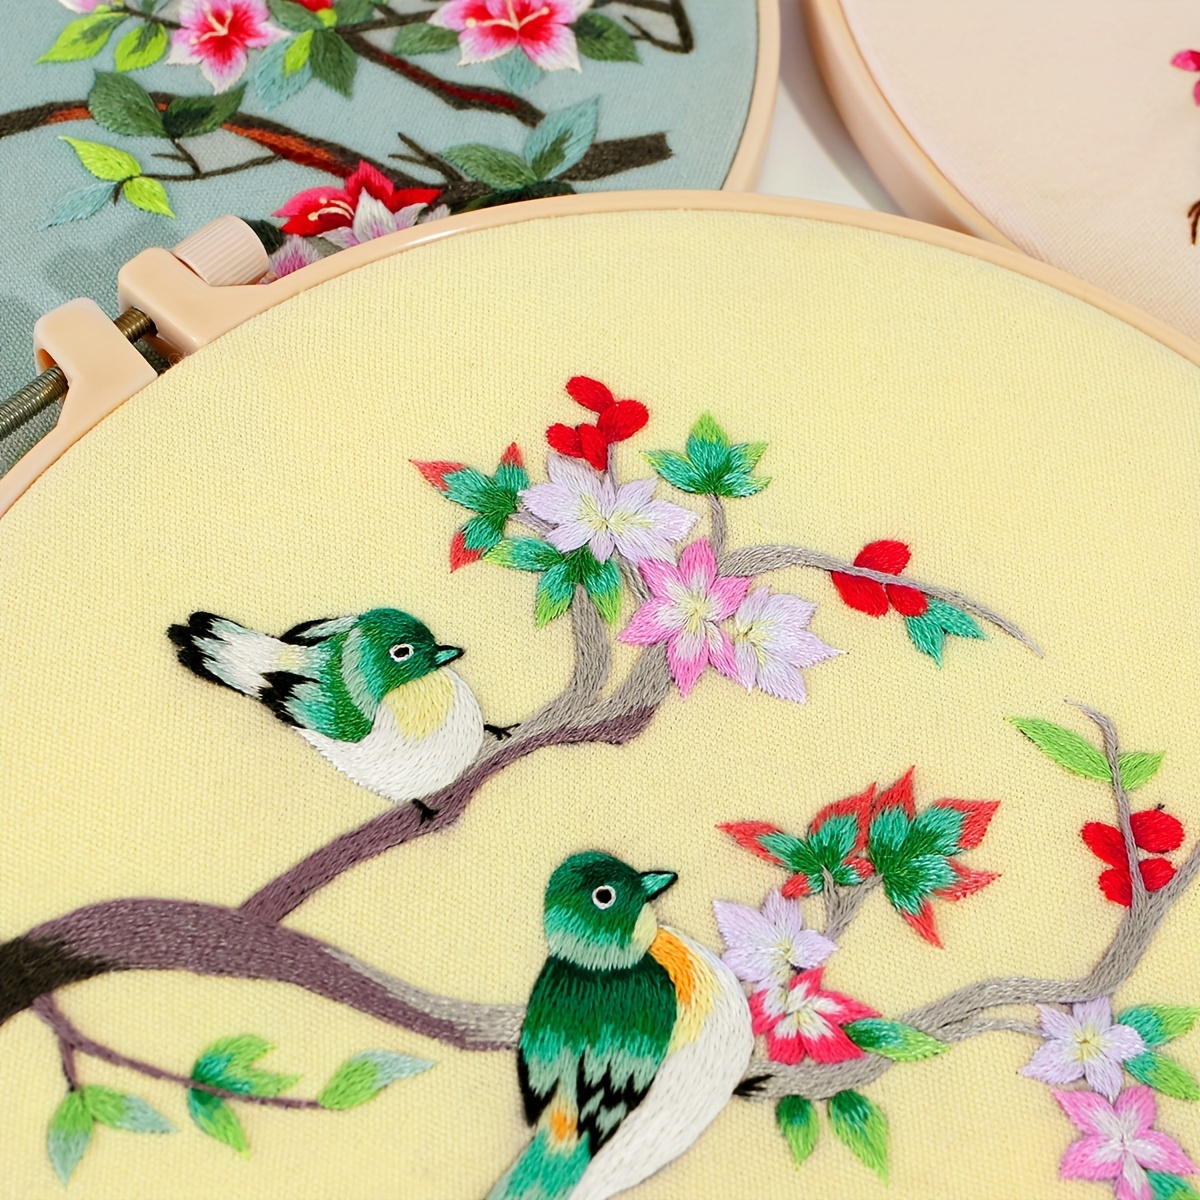 easy-to-use diy embroidery kit flower pattern